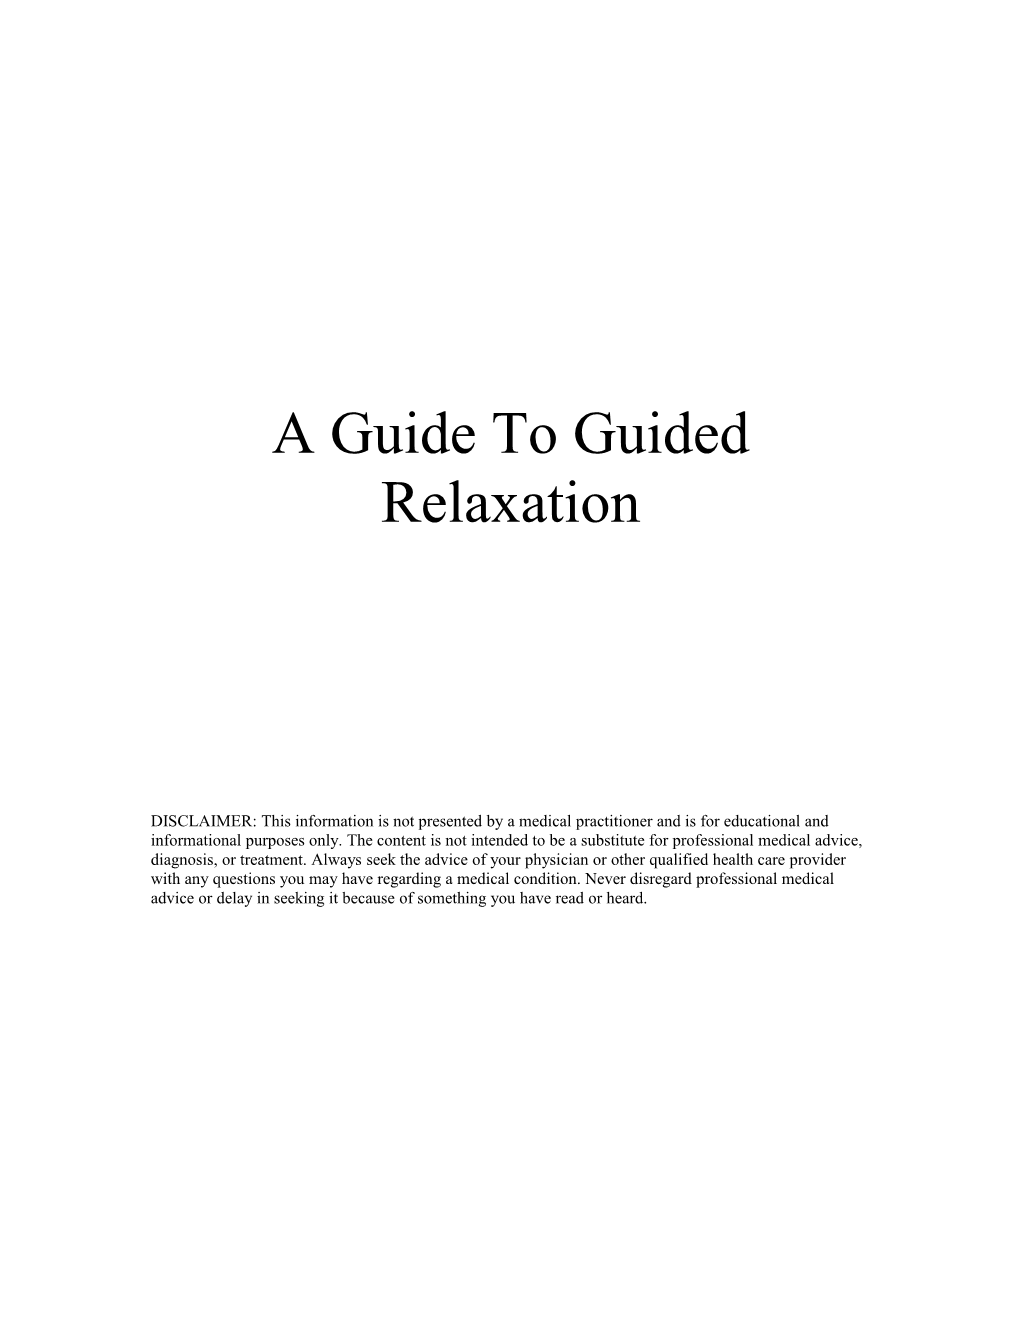 Report for Guided Relaxation